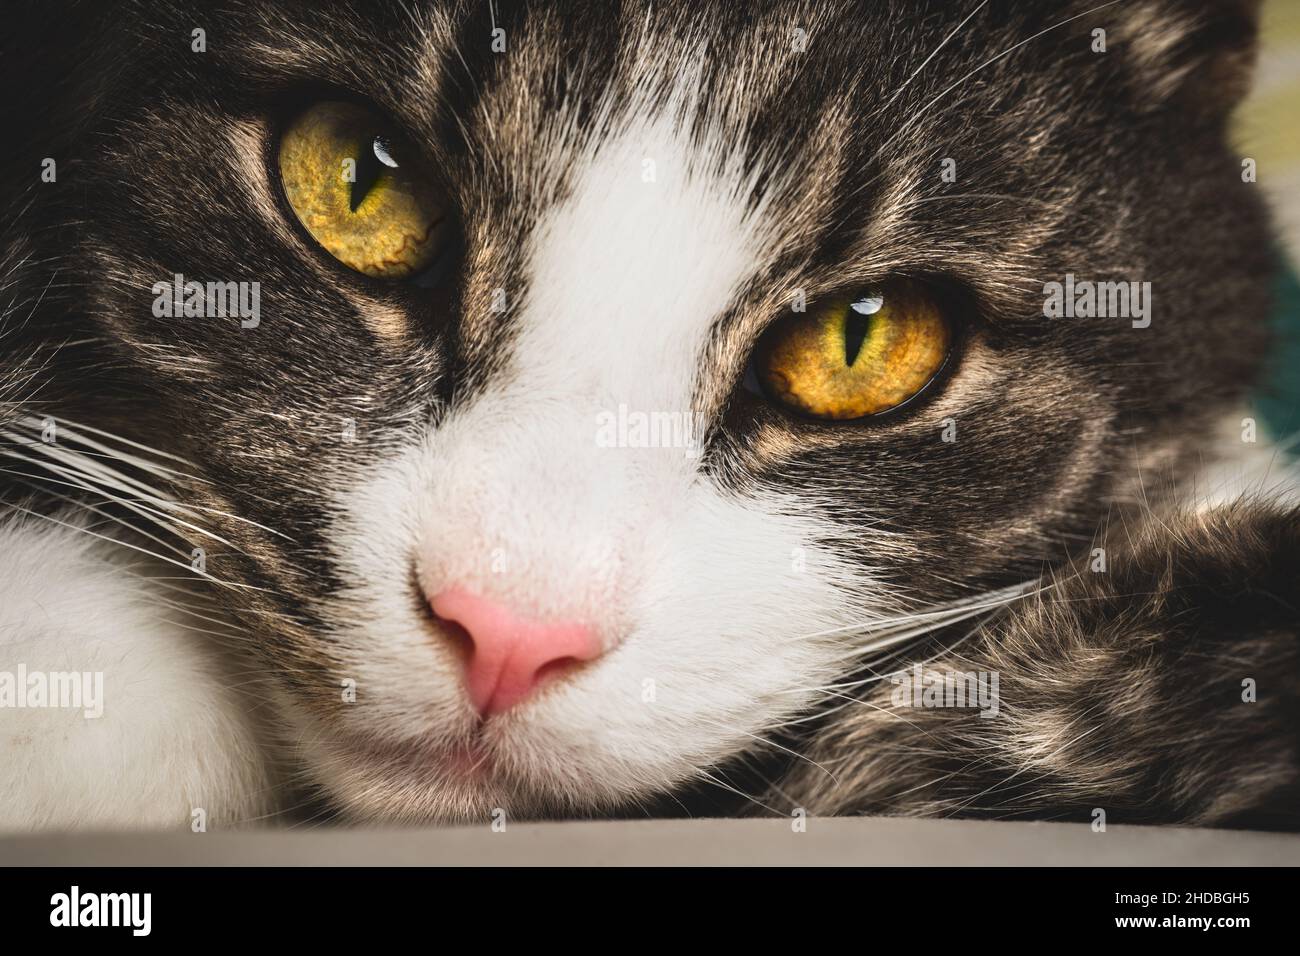 Closeup of cute tabby cat face with big green eyes and pink nose Stock Photo